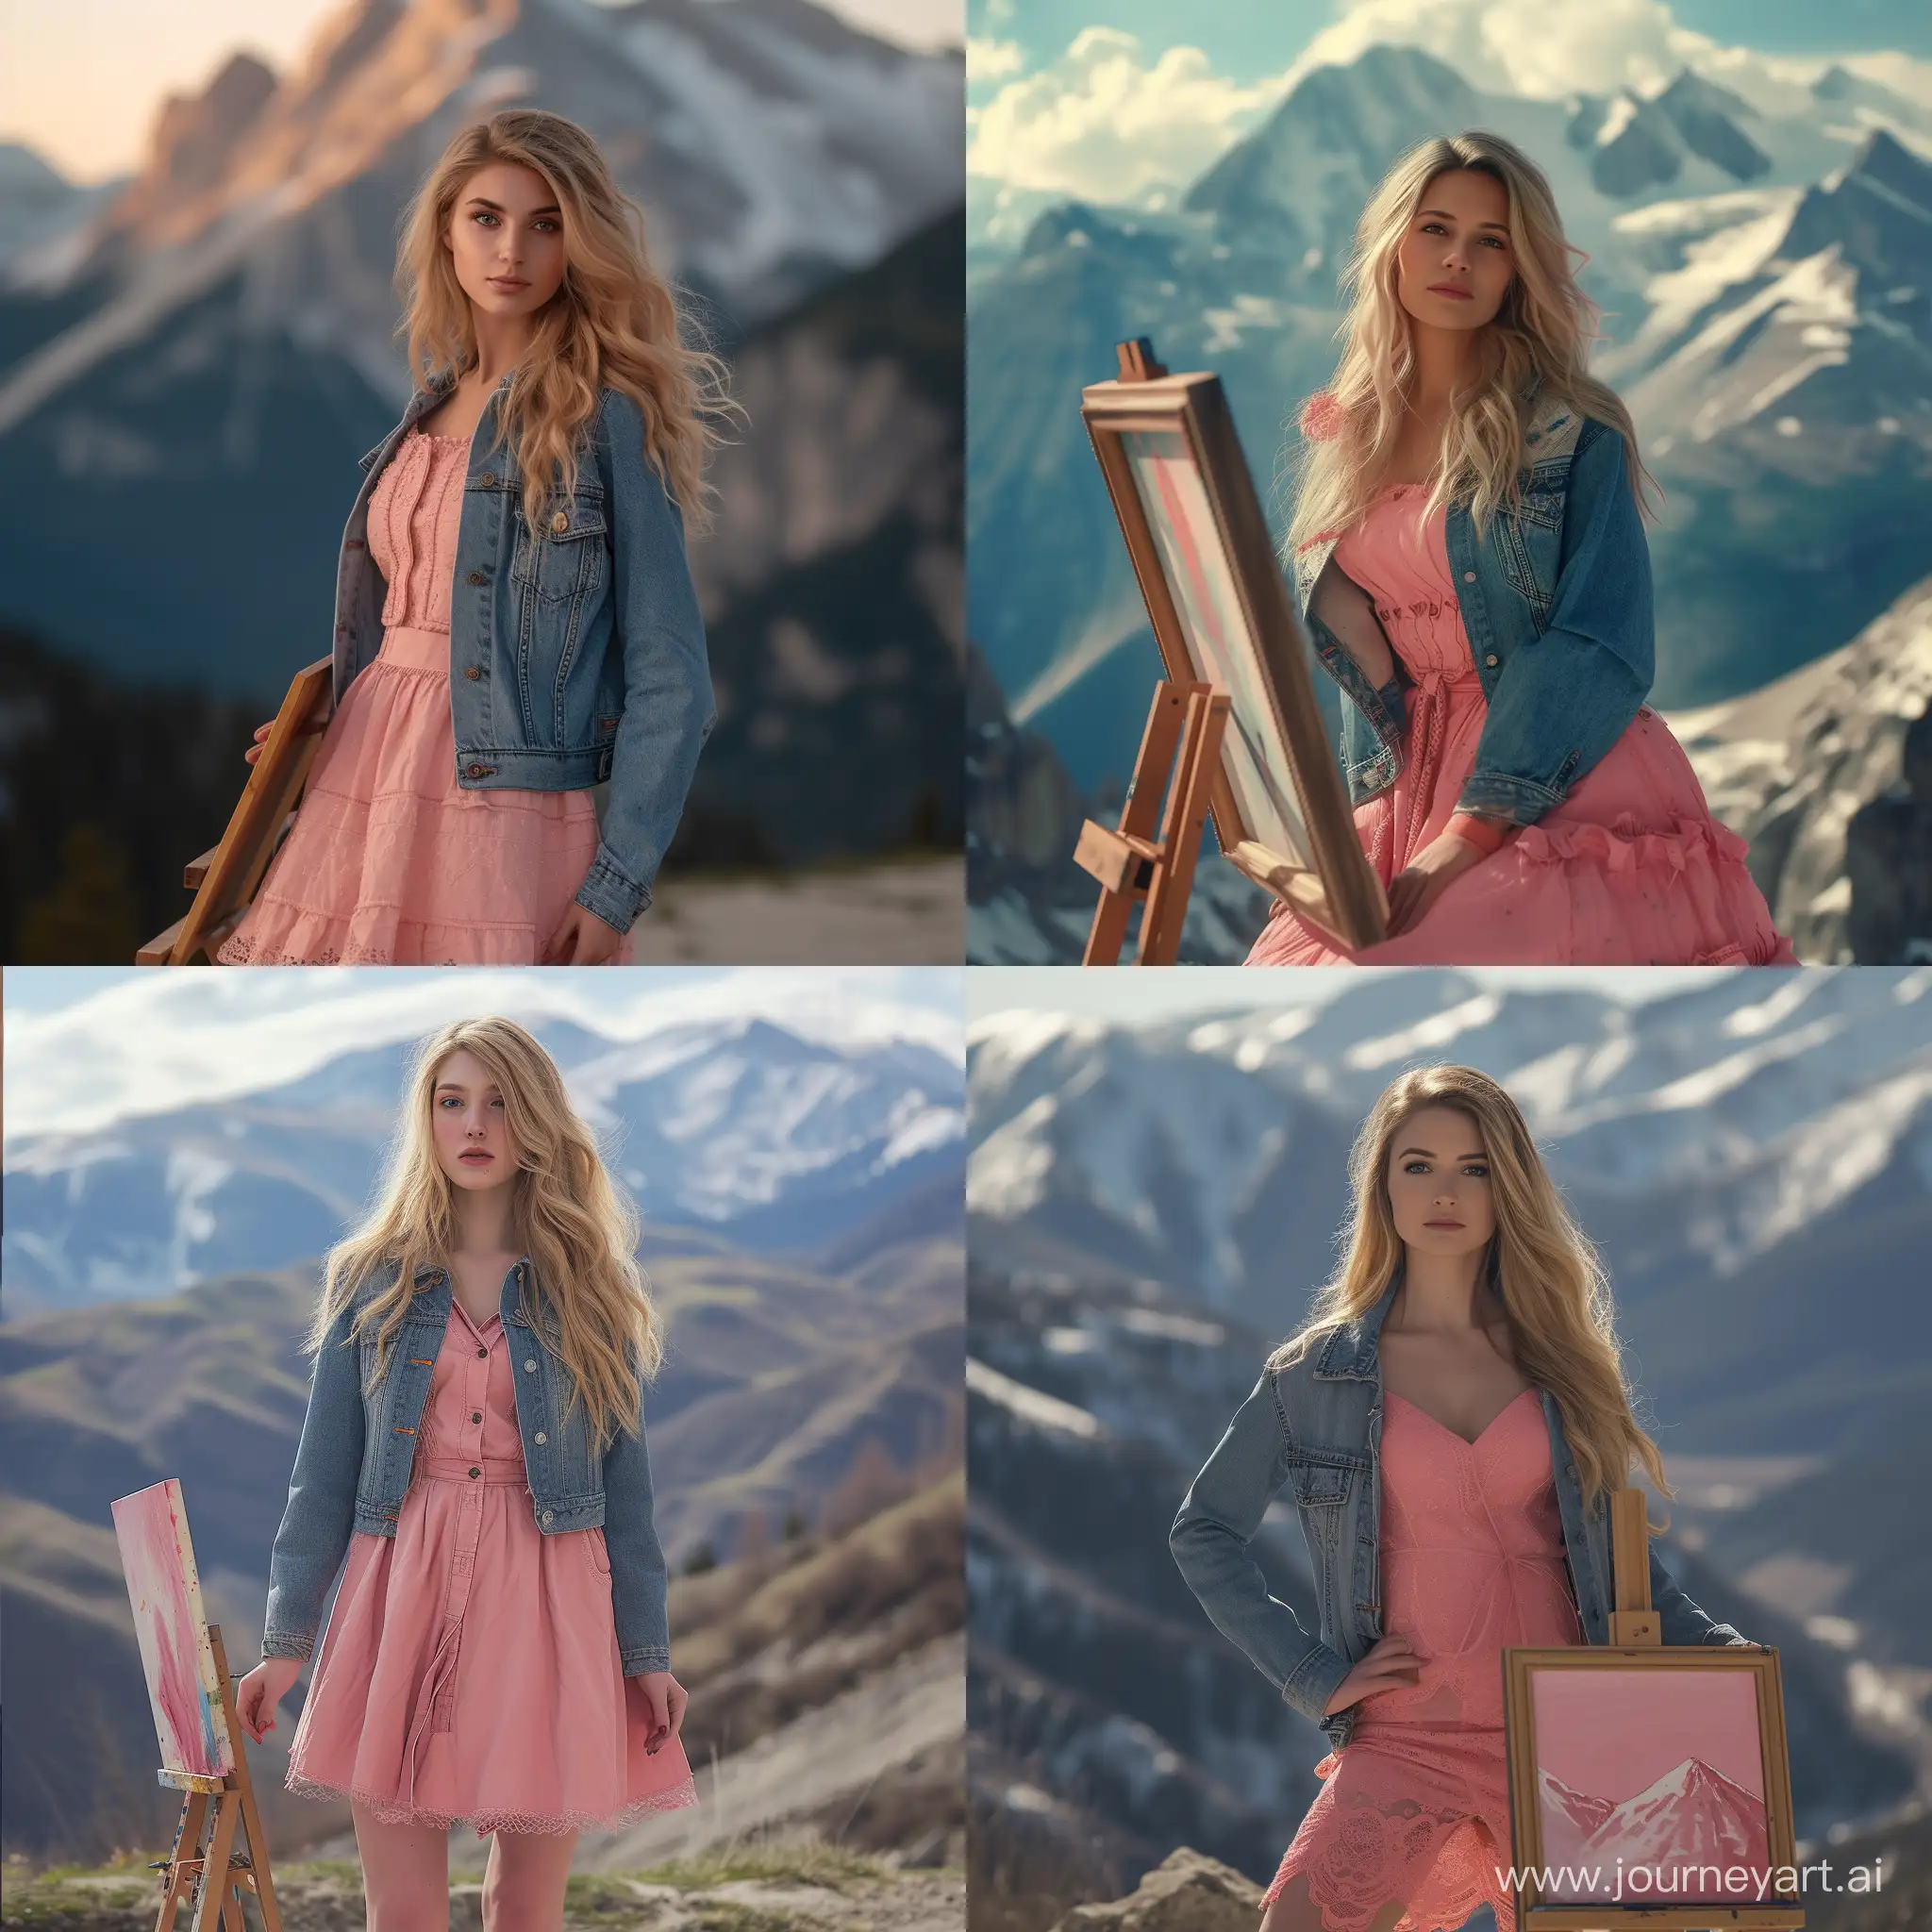 Portrait-of-35YearOld-Female-Artist-in-Pink-Dress-and-Denim-Jacket-with-Mountains-Cinematic-Photoshoot-with-25mm-Lens